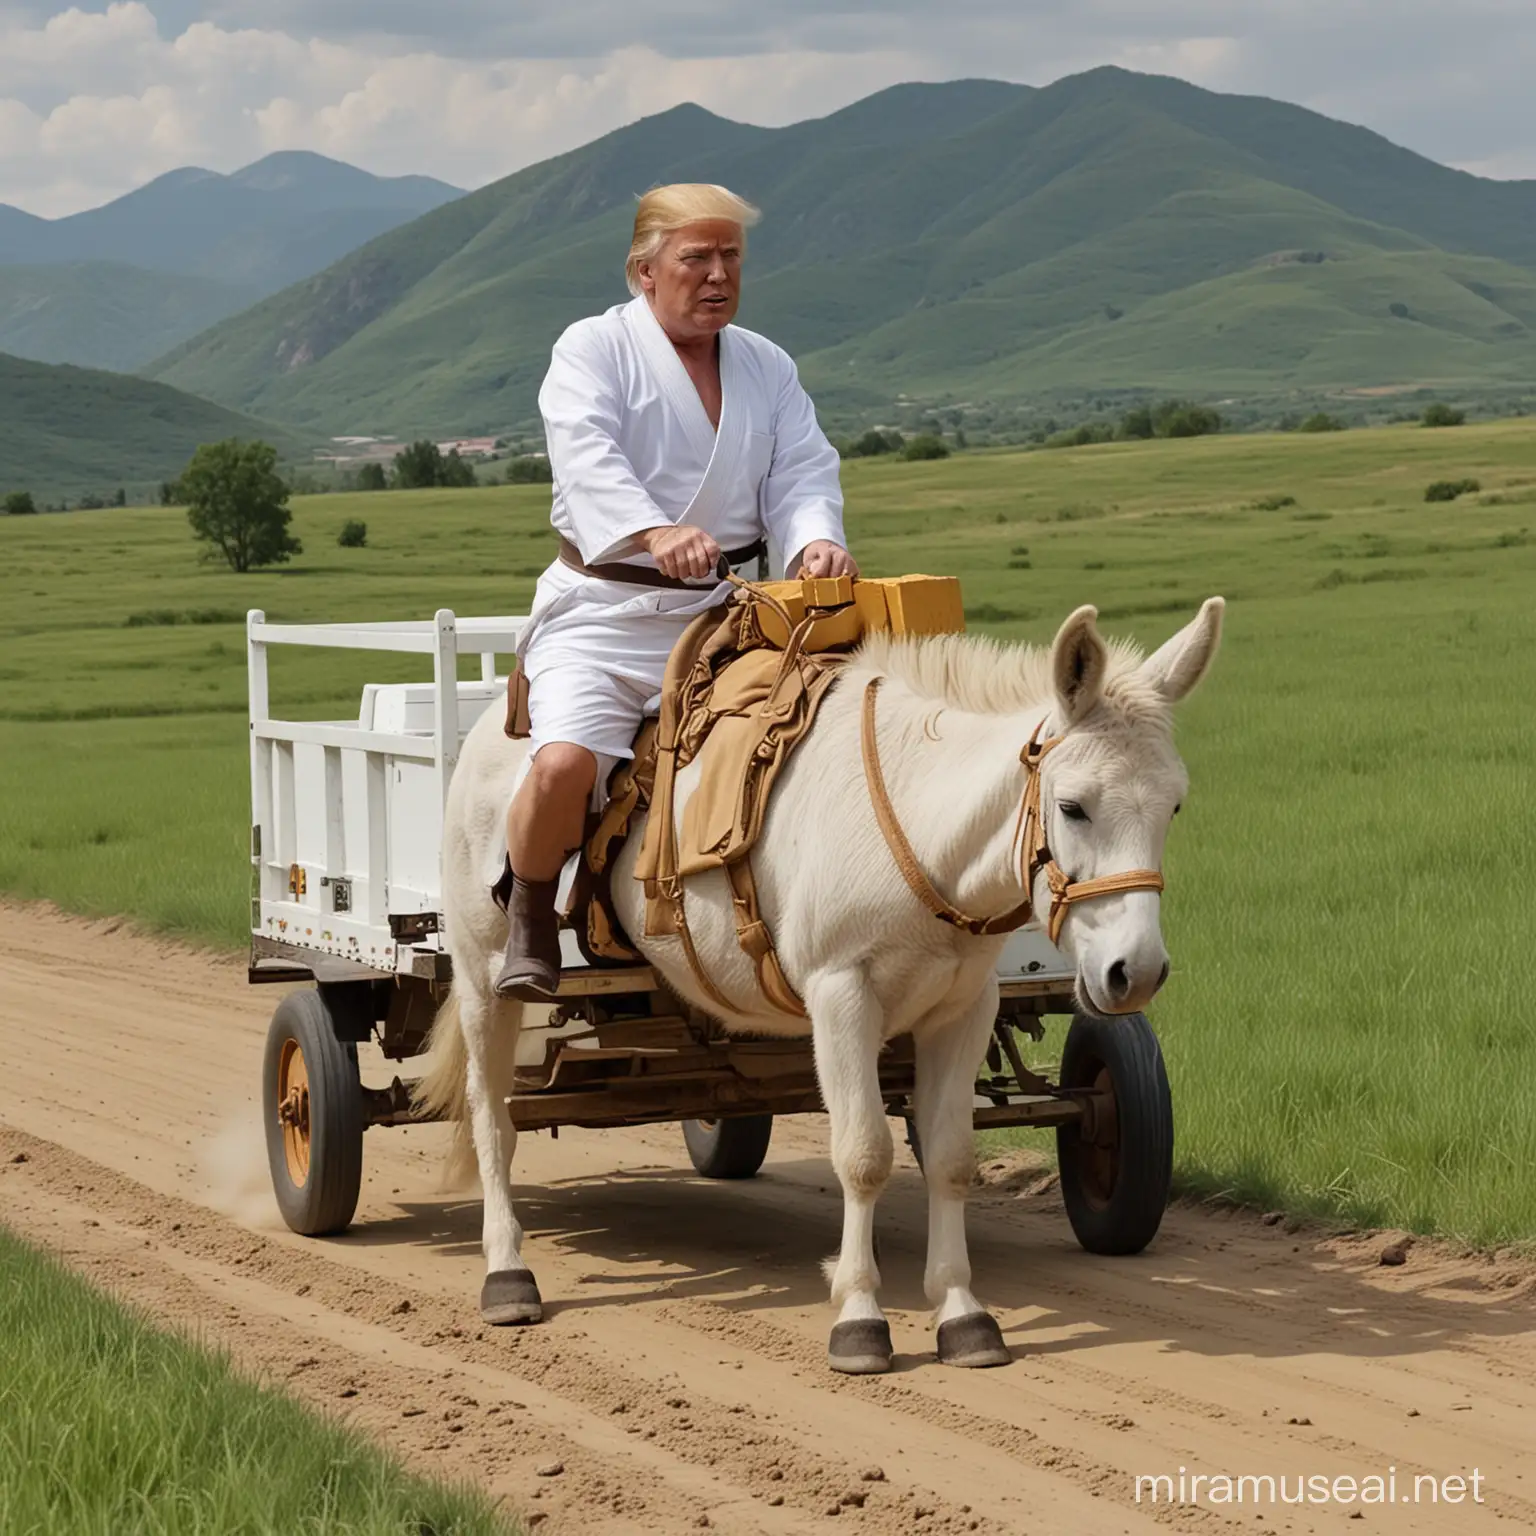 65years old real face donald trump  wear white  Judo attire  driving whitebrown  donkey pull trailer with golden bricks down from moutain 's hole around higher grass,8k,